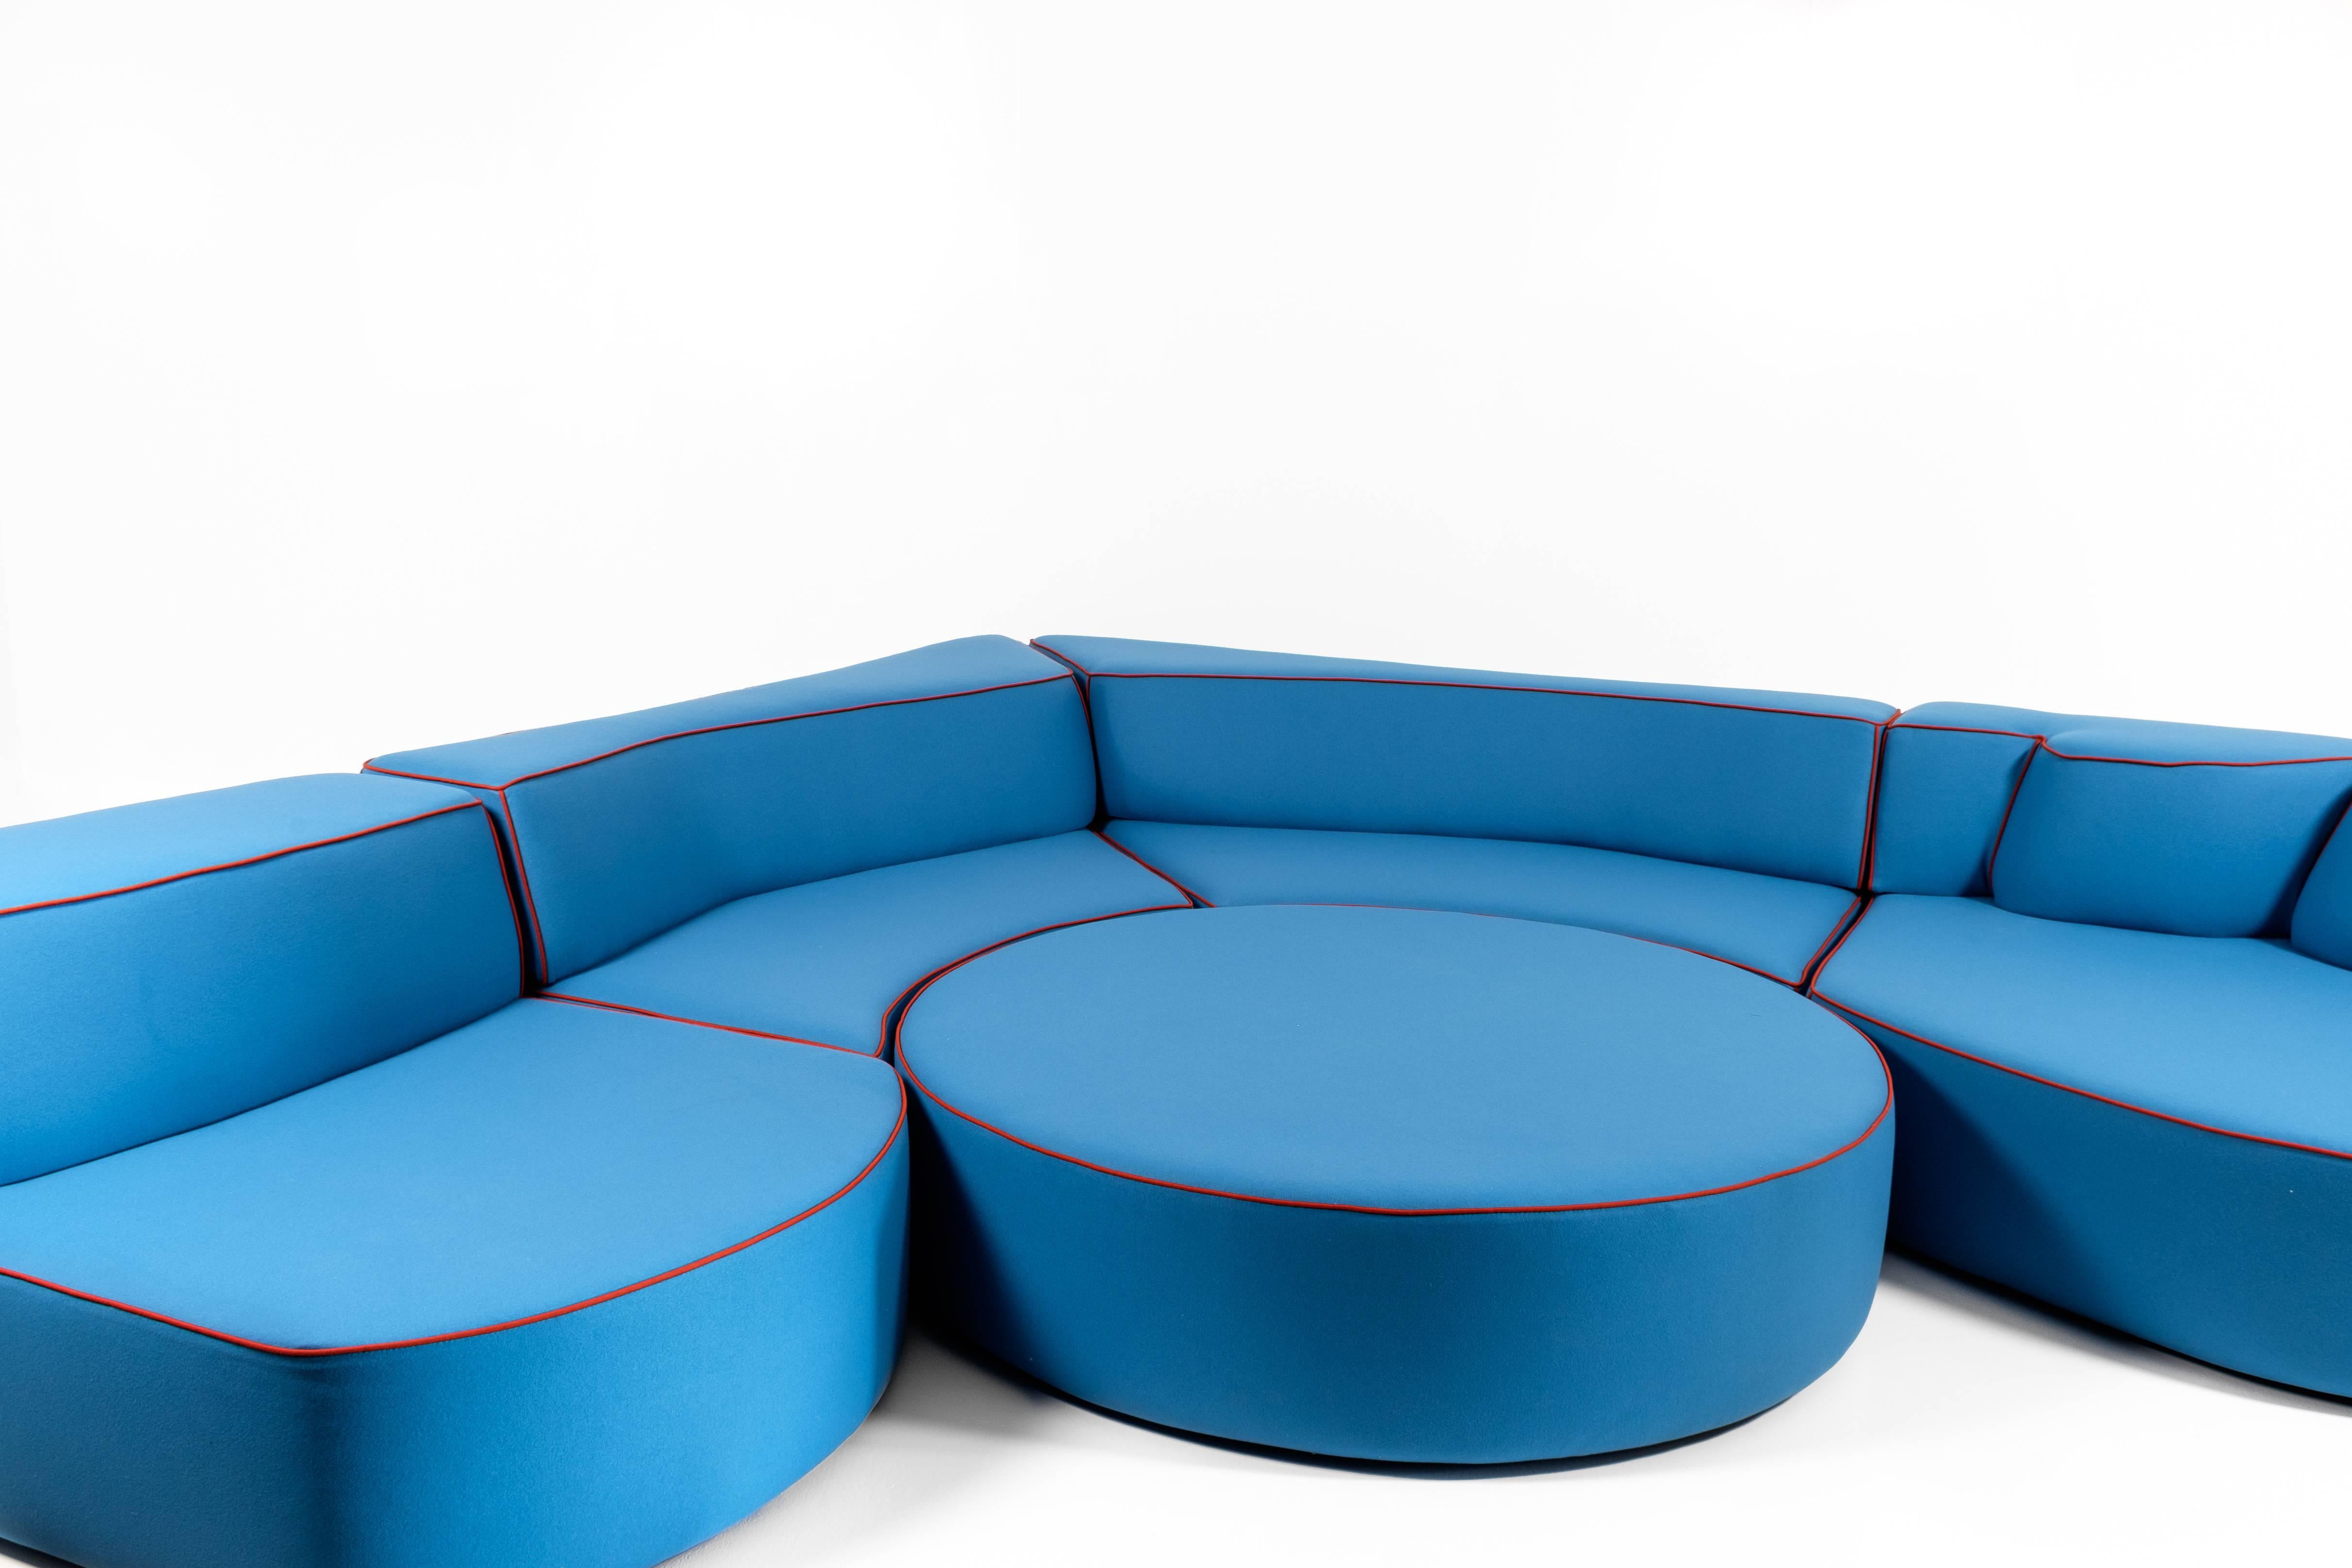 JPDemeyer Home Collection five-piece modular sofa “Comporta” in Azure colour wool.
Funky, off-the-wall modular five-piece island sofa in a polyurethane foam structure. Central ottoman piece can be used as a coffee table or as foot rest pouf. Based